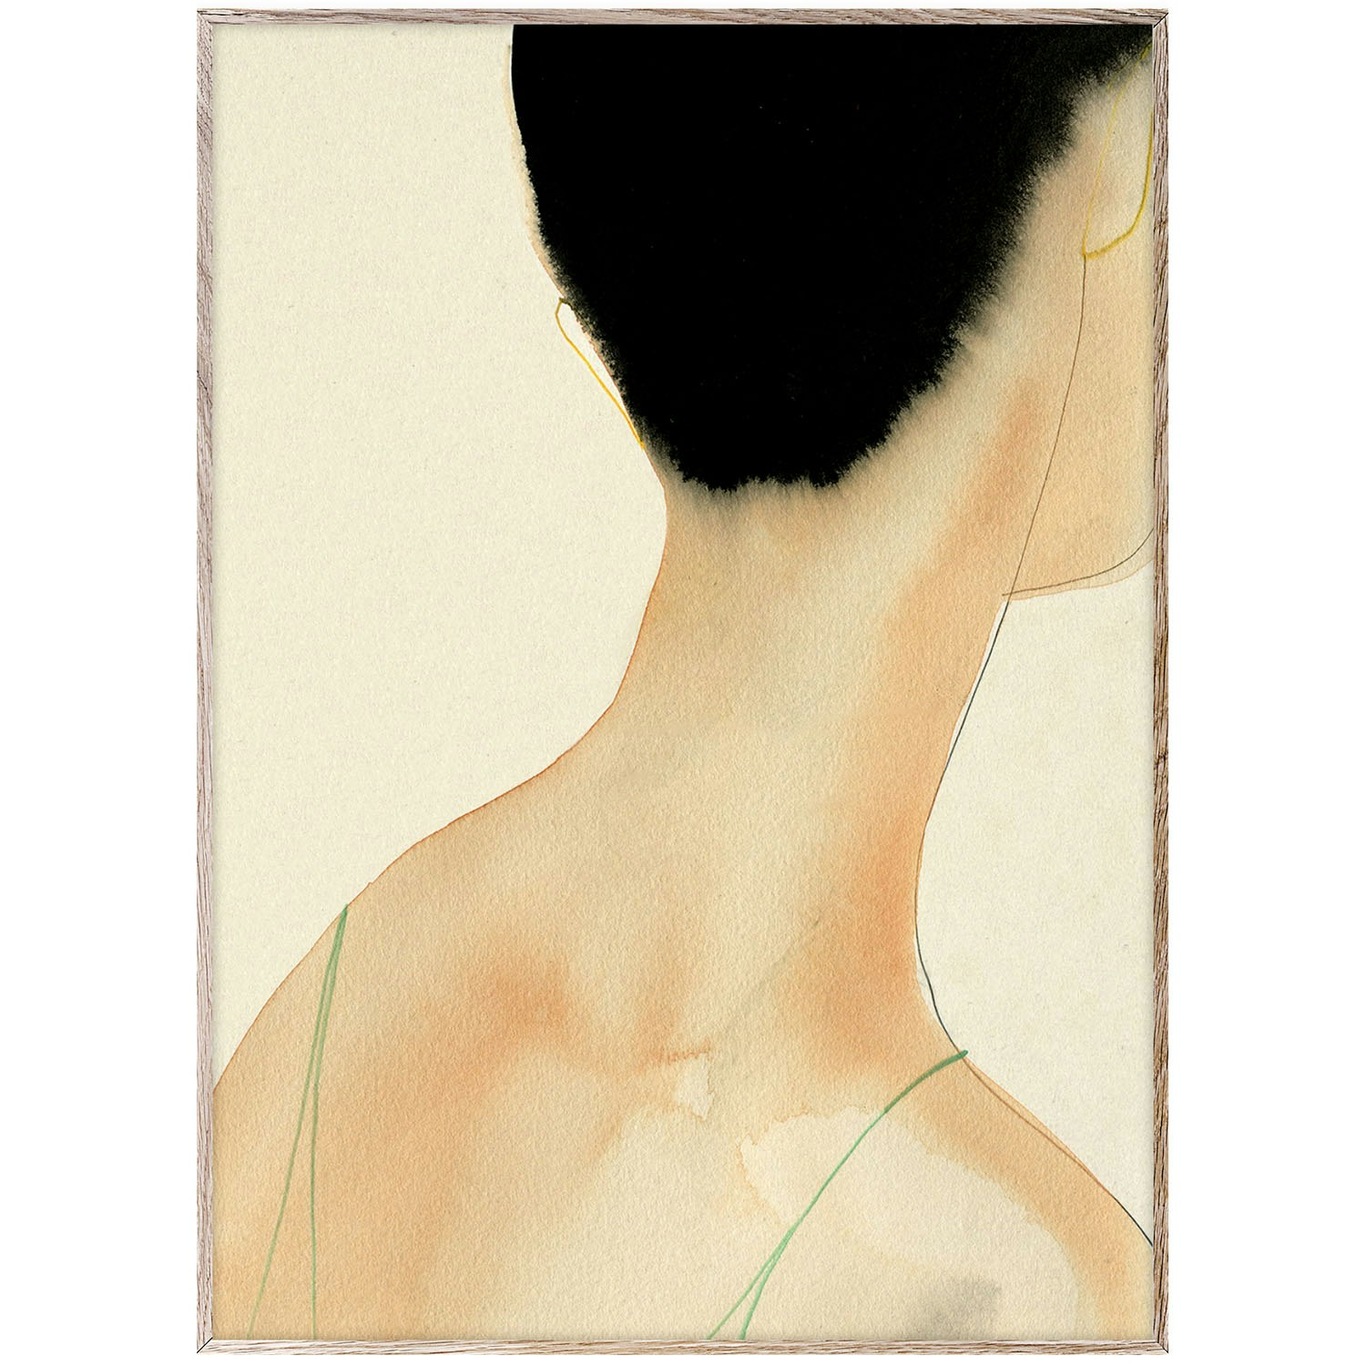 The Green Camisole Poster 30x40 cm